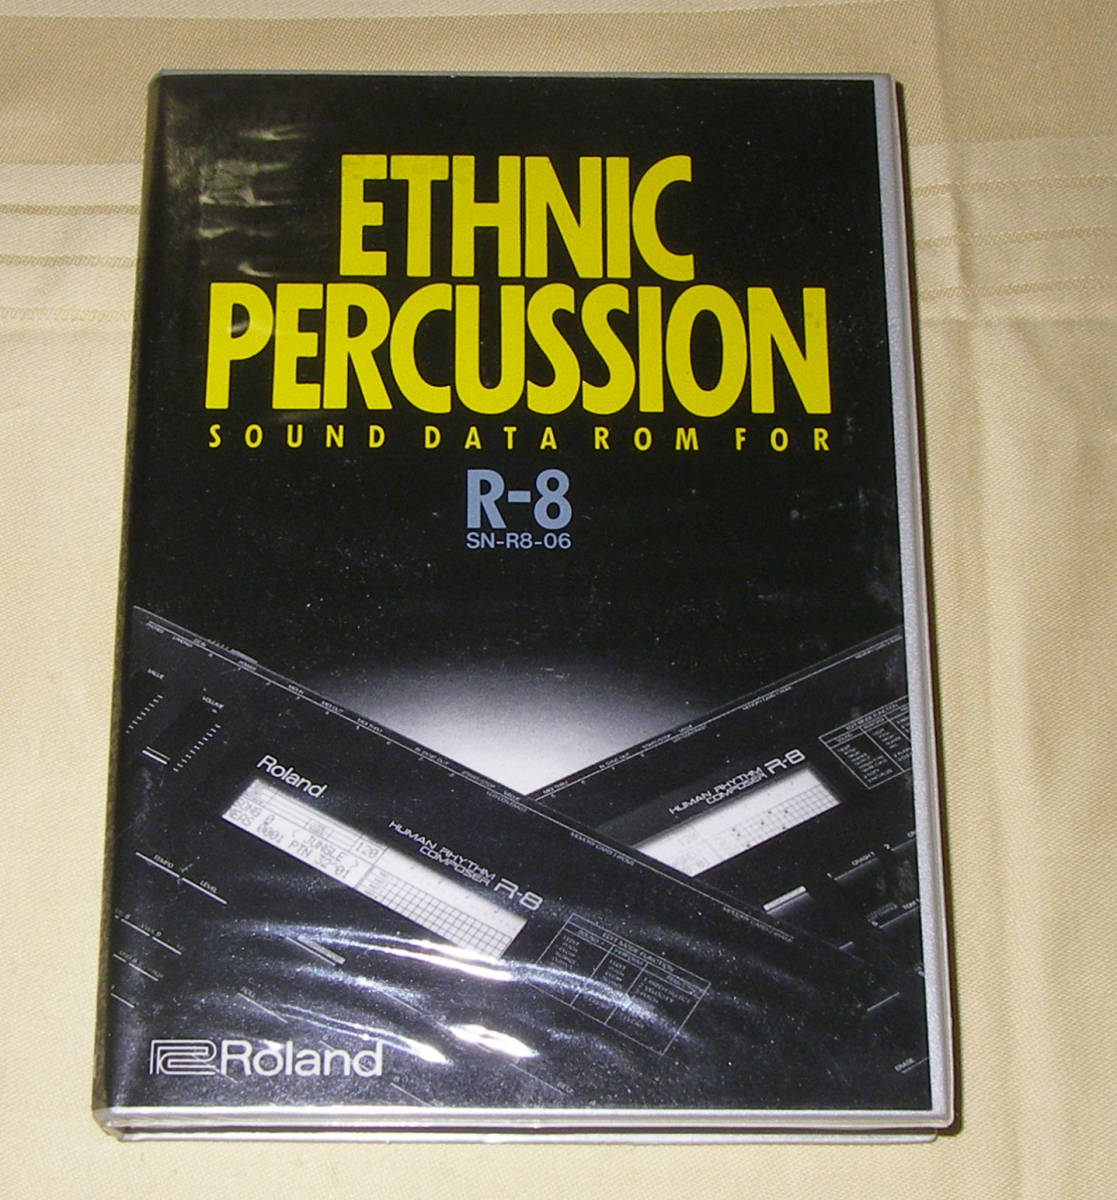 ★Roland SN-R8-06 Ethnic Percussion SOUND LIBRARY★OK!!★MADE in JAPAN★